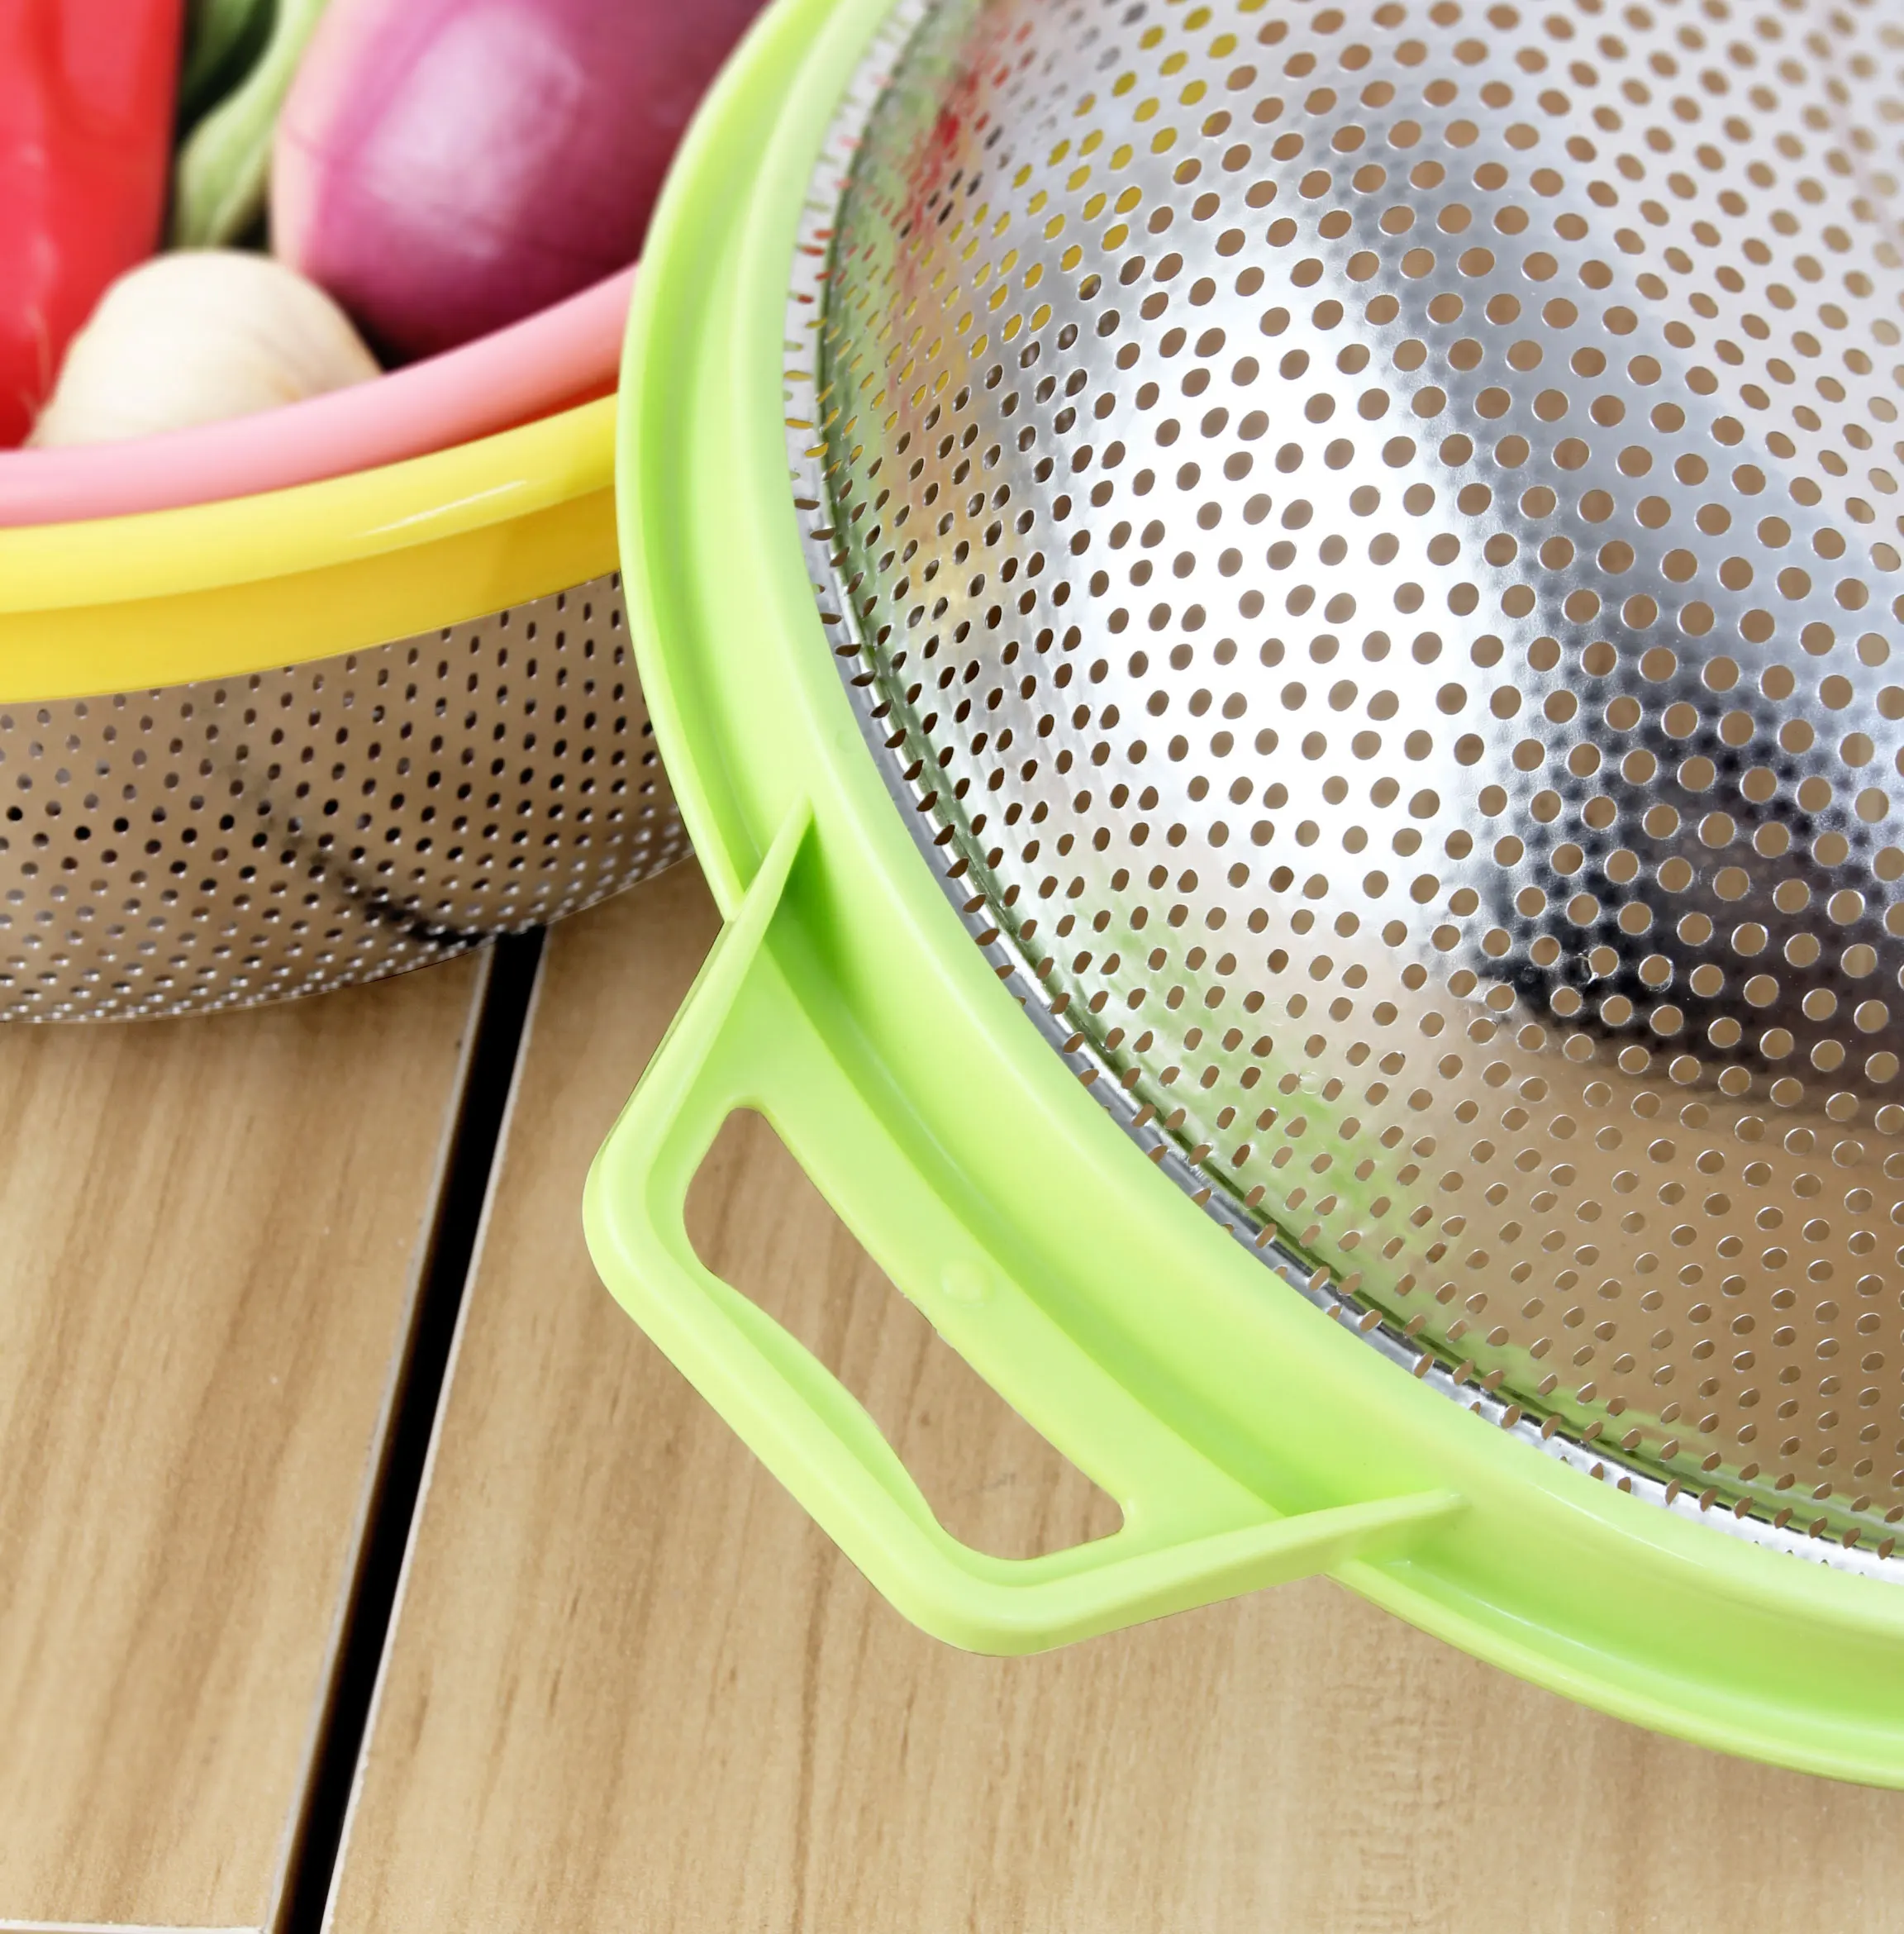 Multi purpose Stainless steel fruit or vegetable basket for kitchen usage